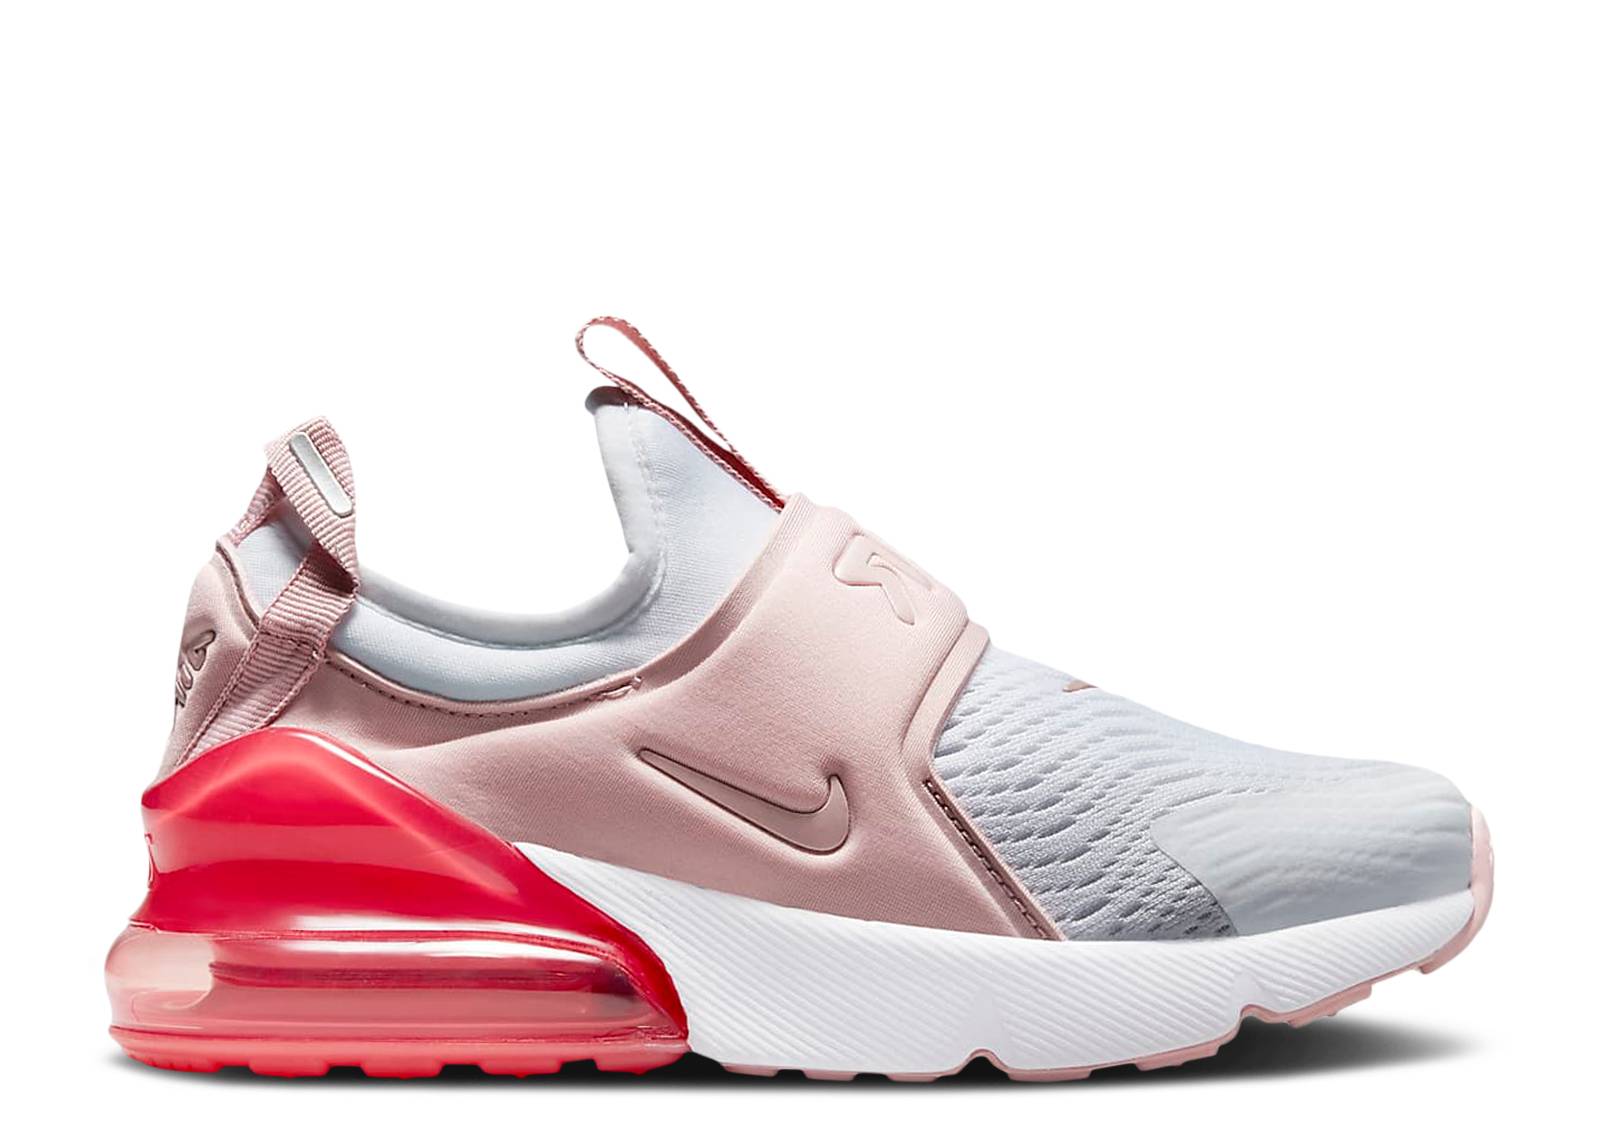 Air Max 270 Extreme PS 'White Pink Glaze'